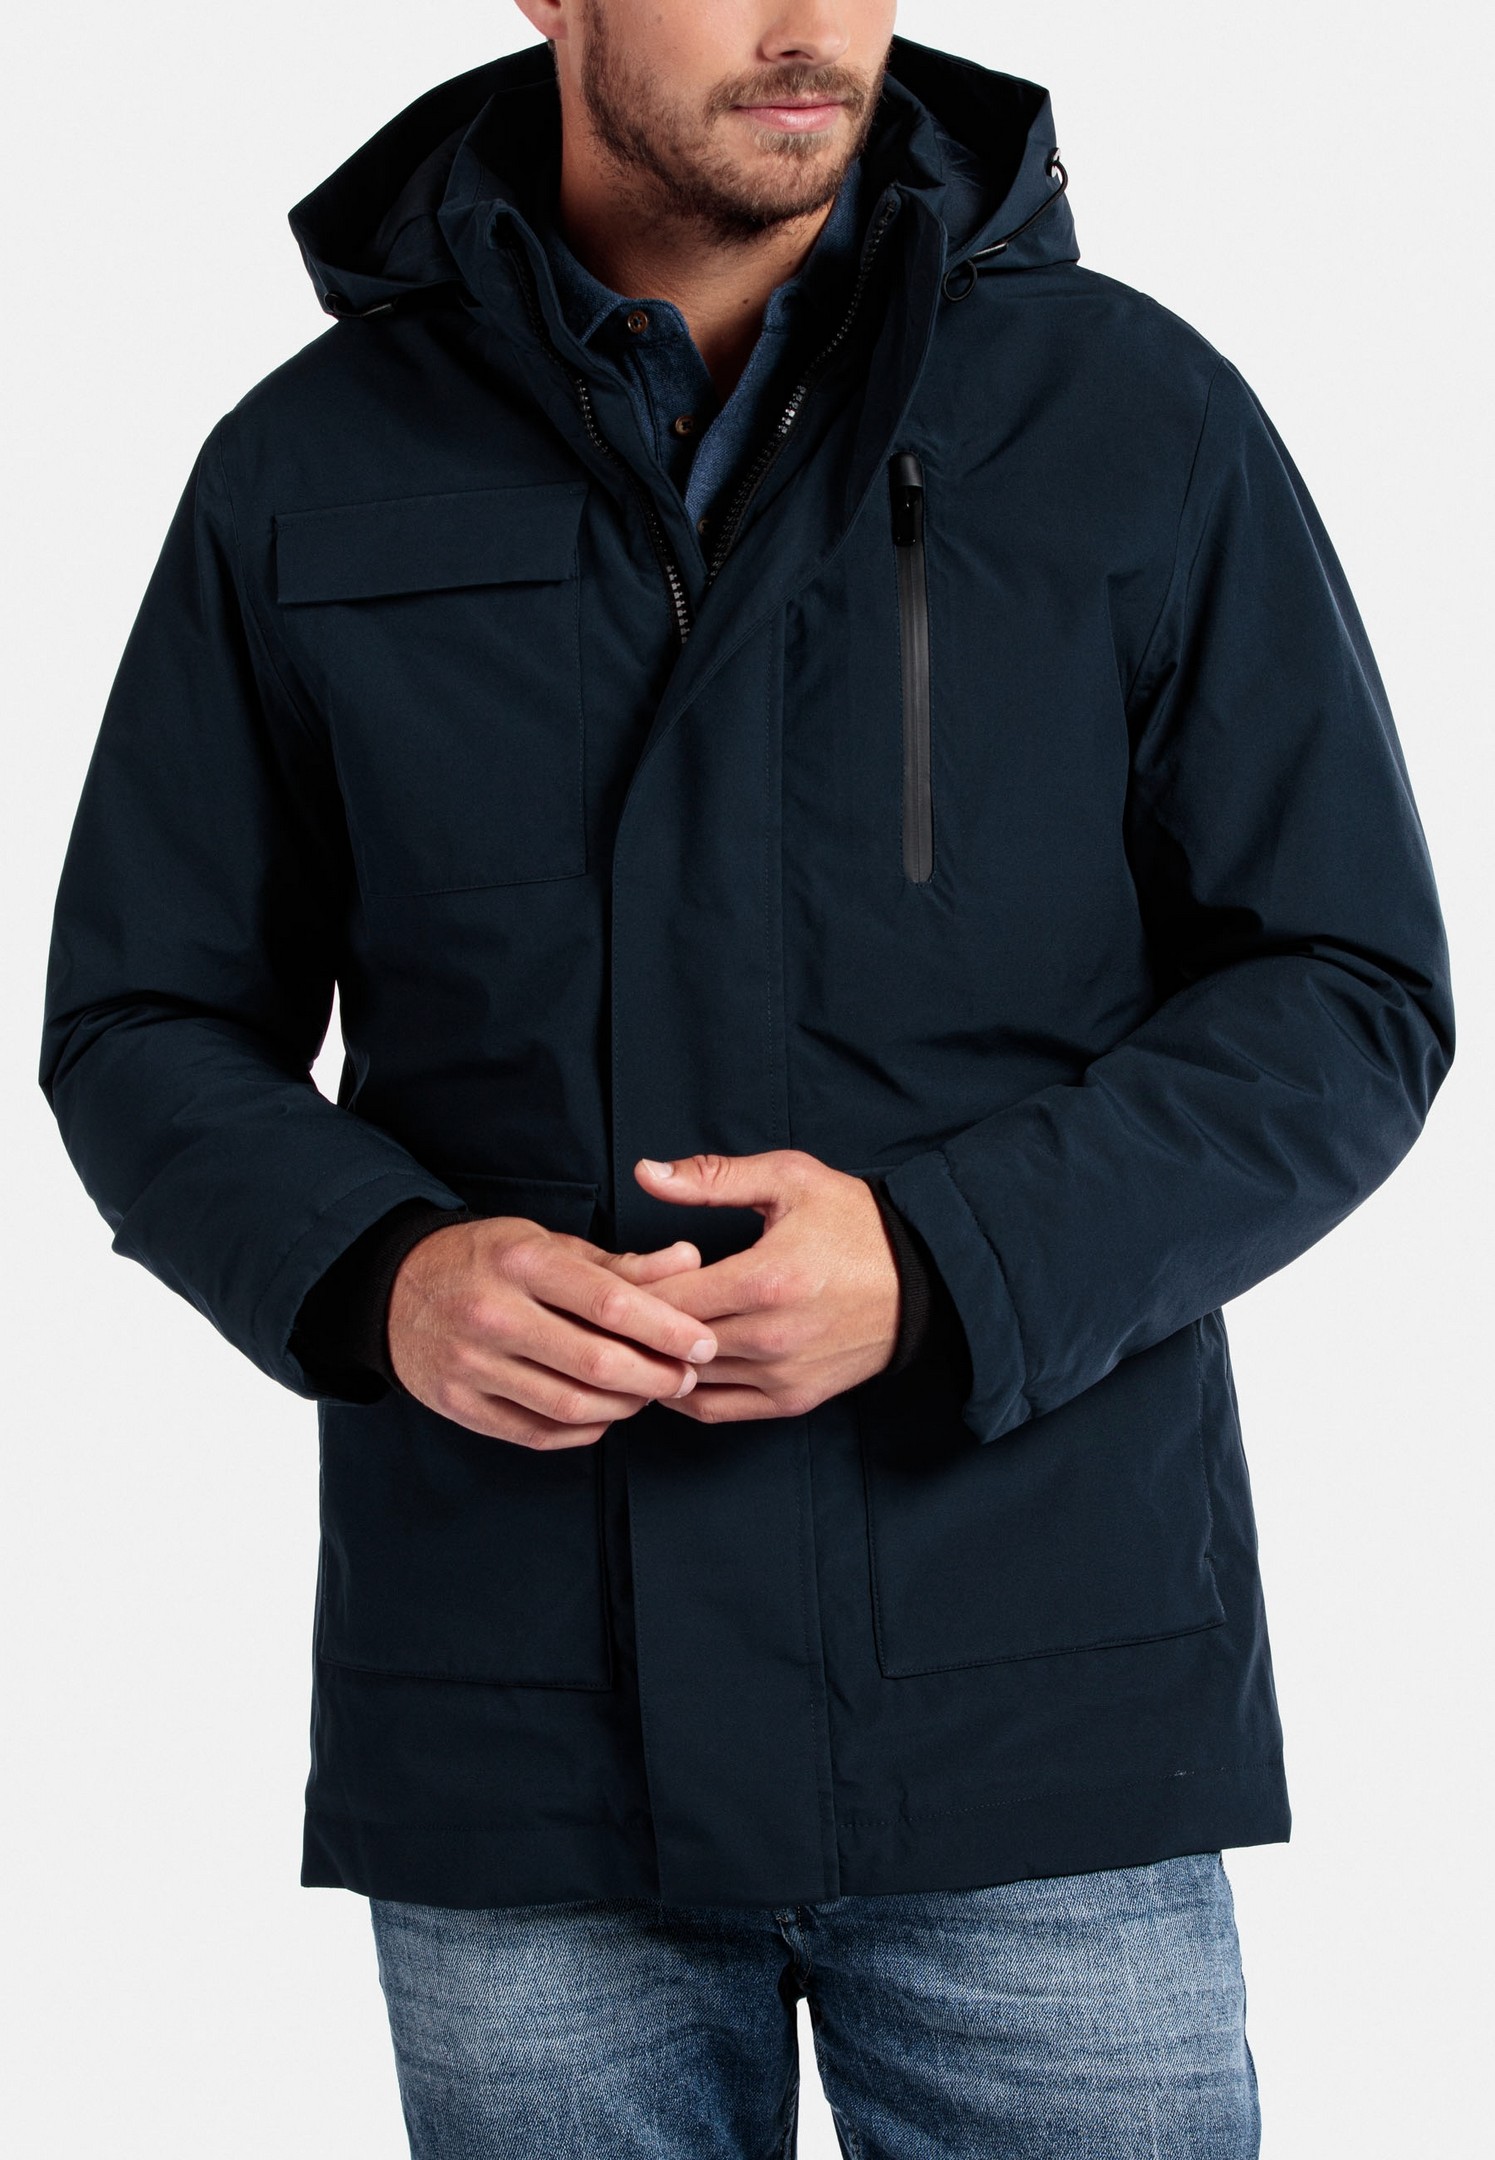 Giordano Jacket Removable Hood Water and Windproof Dark Navy | Jan Rozing  Men\'s Fashion